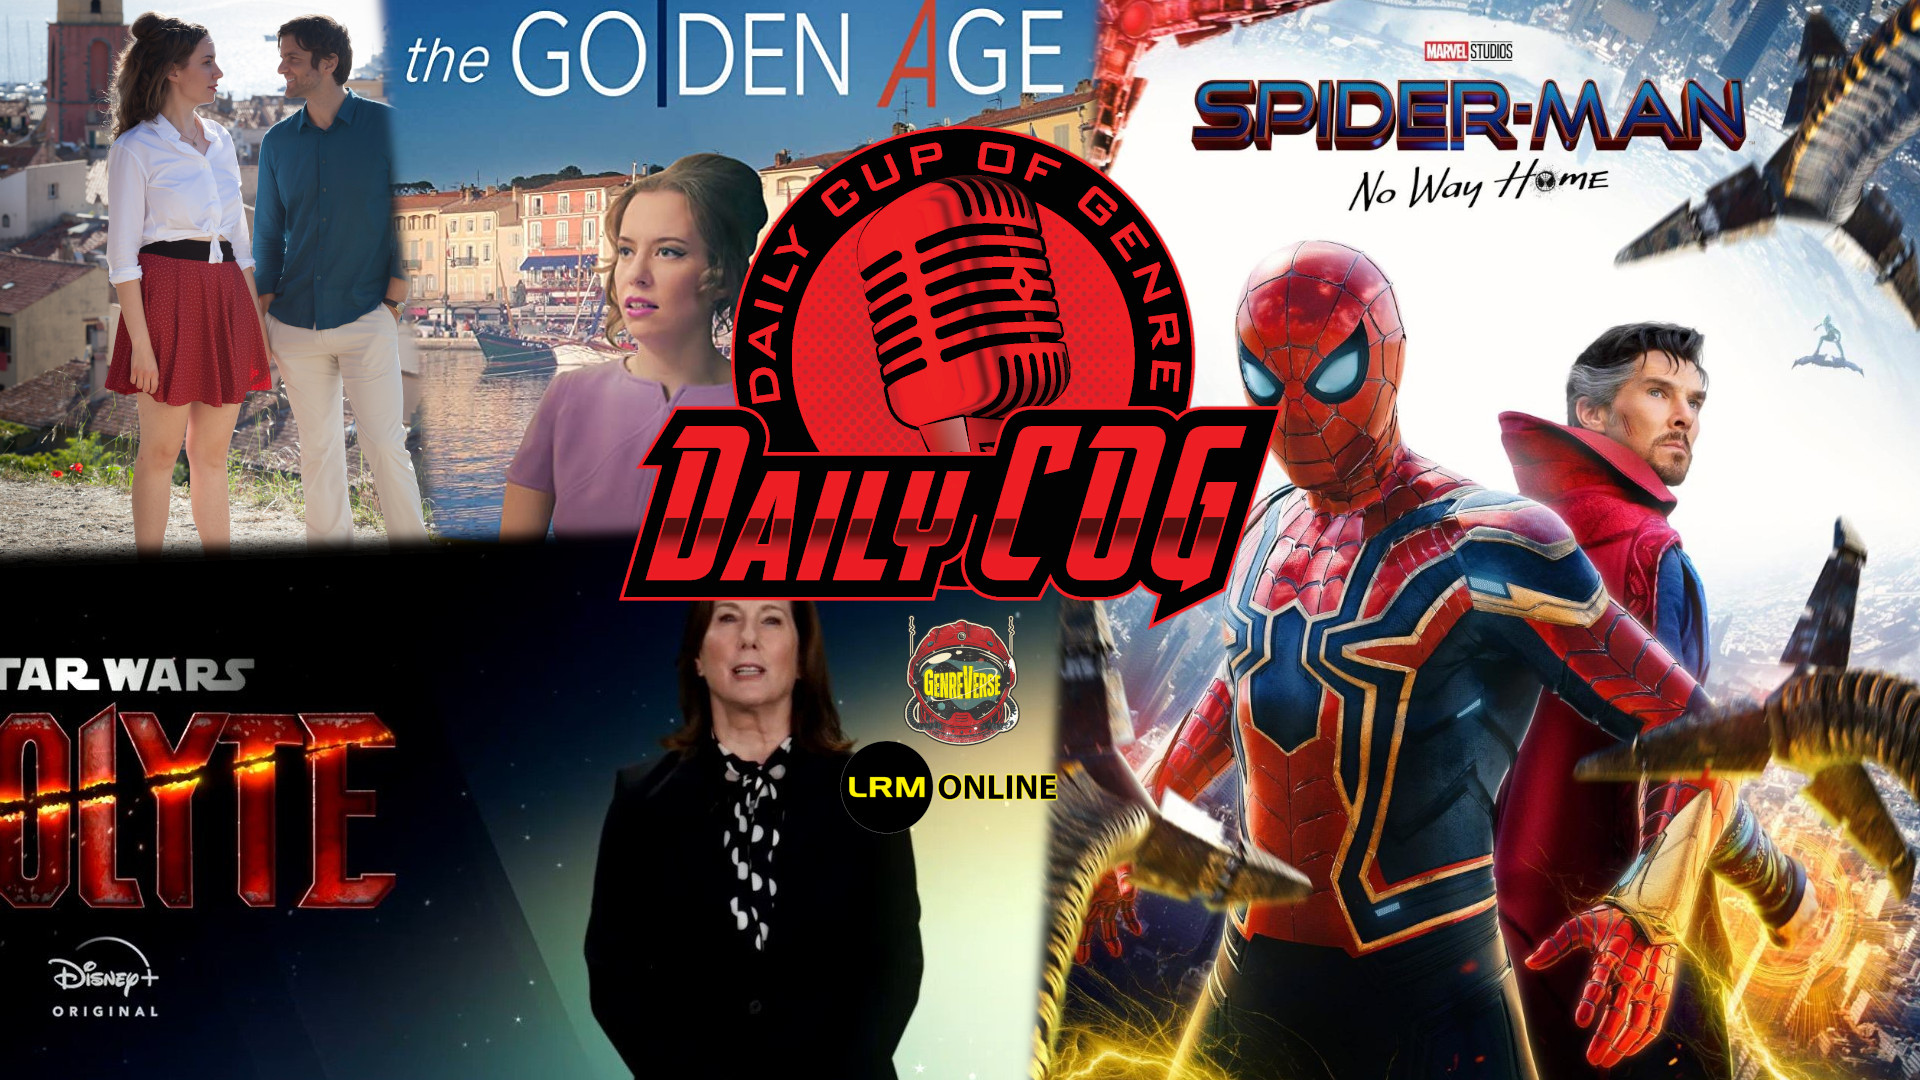 3 More Years For Kathleen Kennedy At LucasFilm, Guest Jenna Suru And Her Film The Golden Age, Spider-Man: No Way Home Trailer Rumors | Daily COG